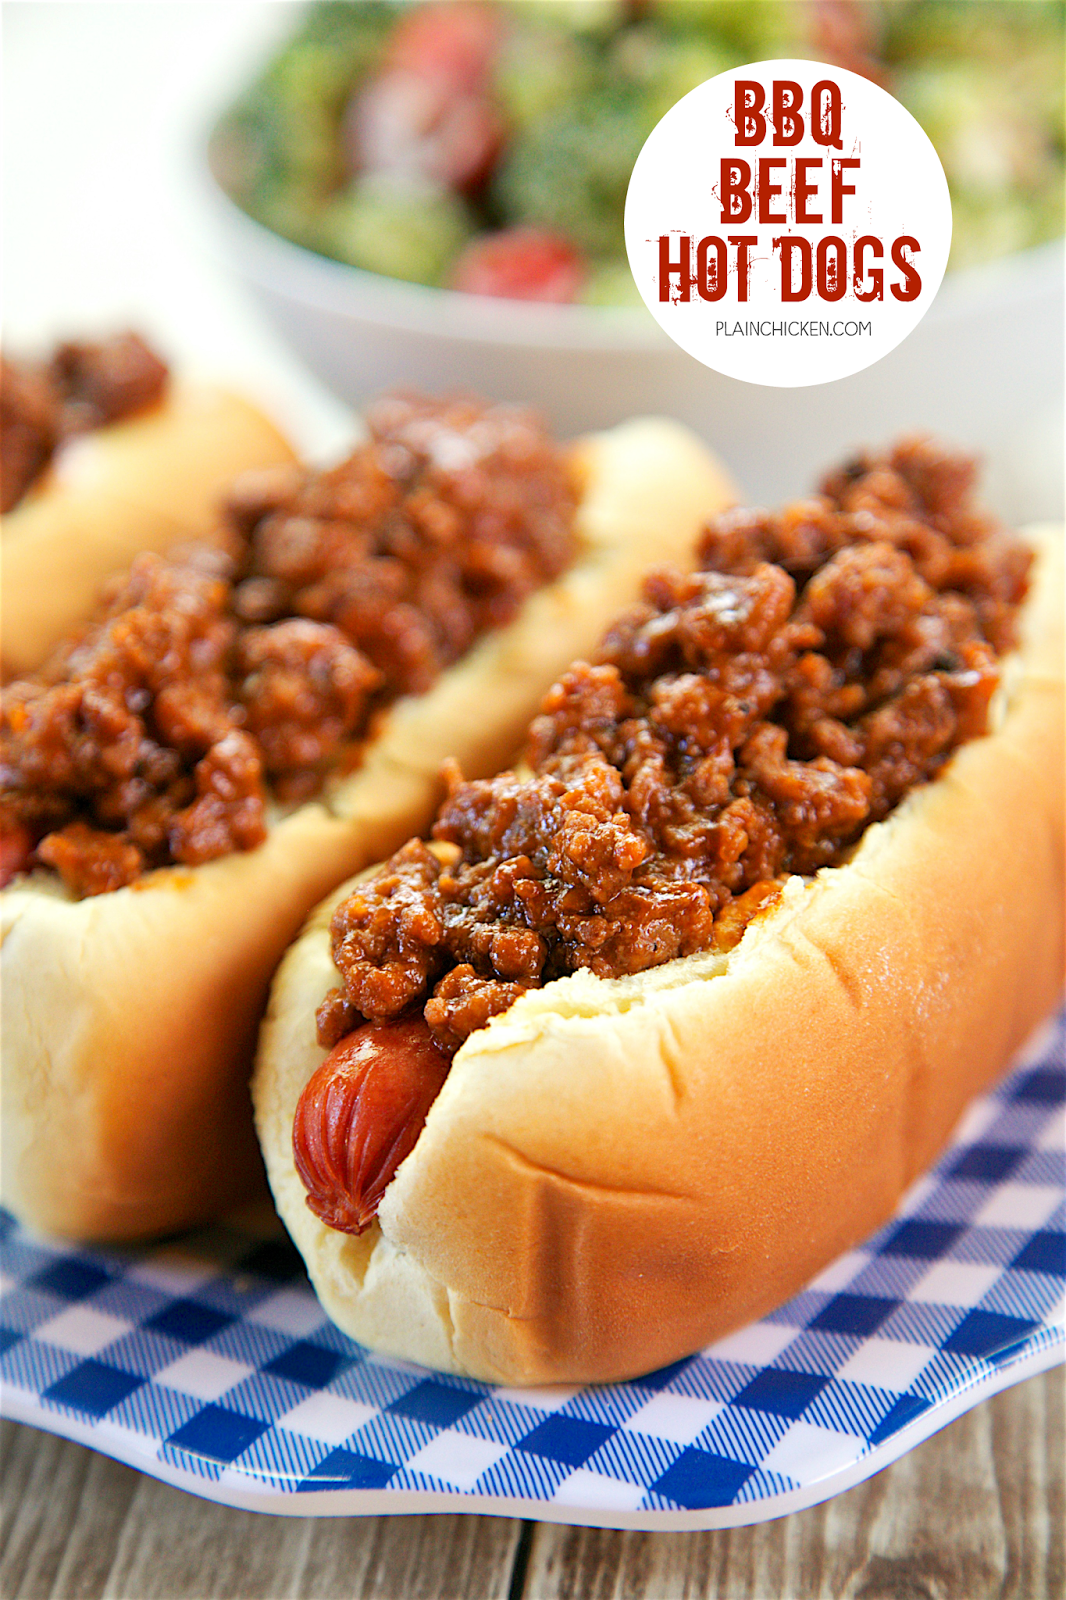 BBQ Beef Hot Dogs - only 4 ingredients! Hamburger, BBQ sauce, hot dogs and buns. SO easy and SO delicious! Top with cheese and fried onions if desired. The whole family loved these. Great for cookouts and tailgates!